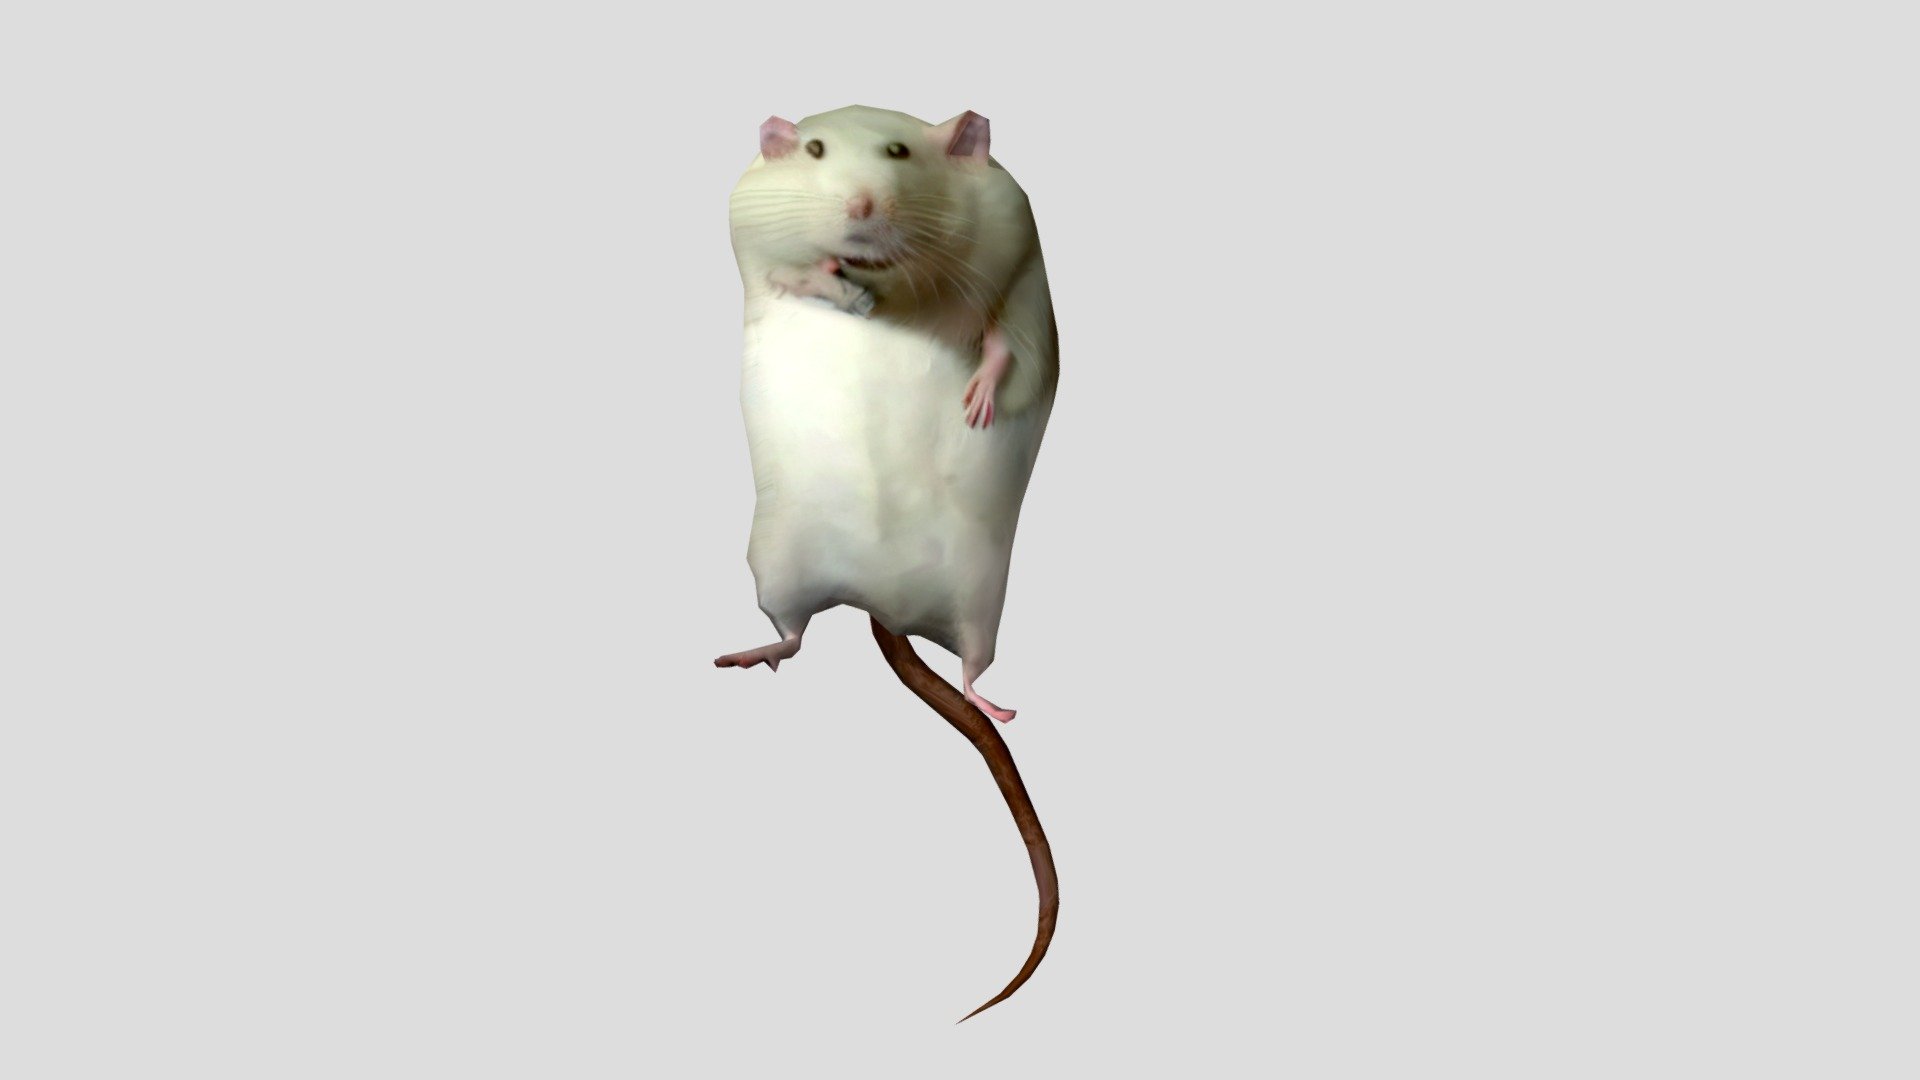 model from original addon, this time i won't repeat my mistakes and let anyone publish it prior to me. i don't know actual rat's or owner's name - robert the fat rat - Download Free 3D model by bean(alwayshasbean) (@alwayshasbean) 3d model